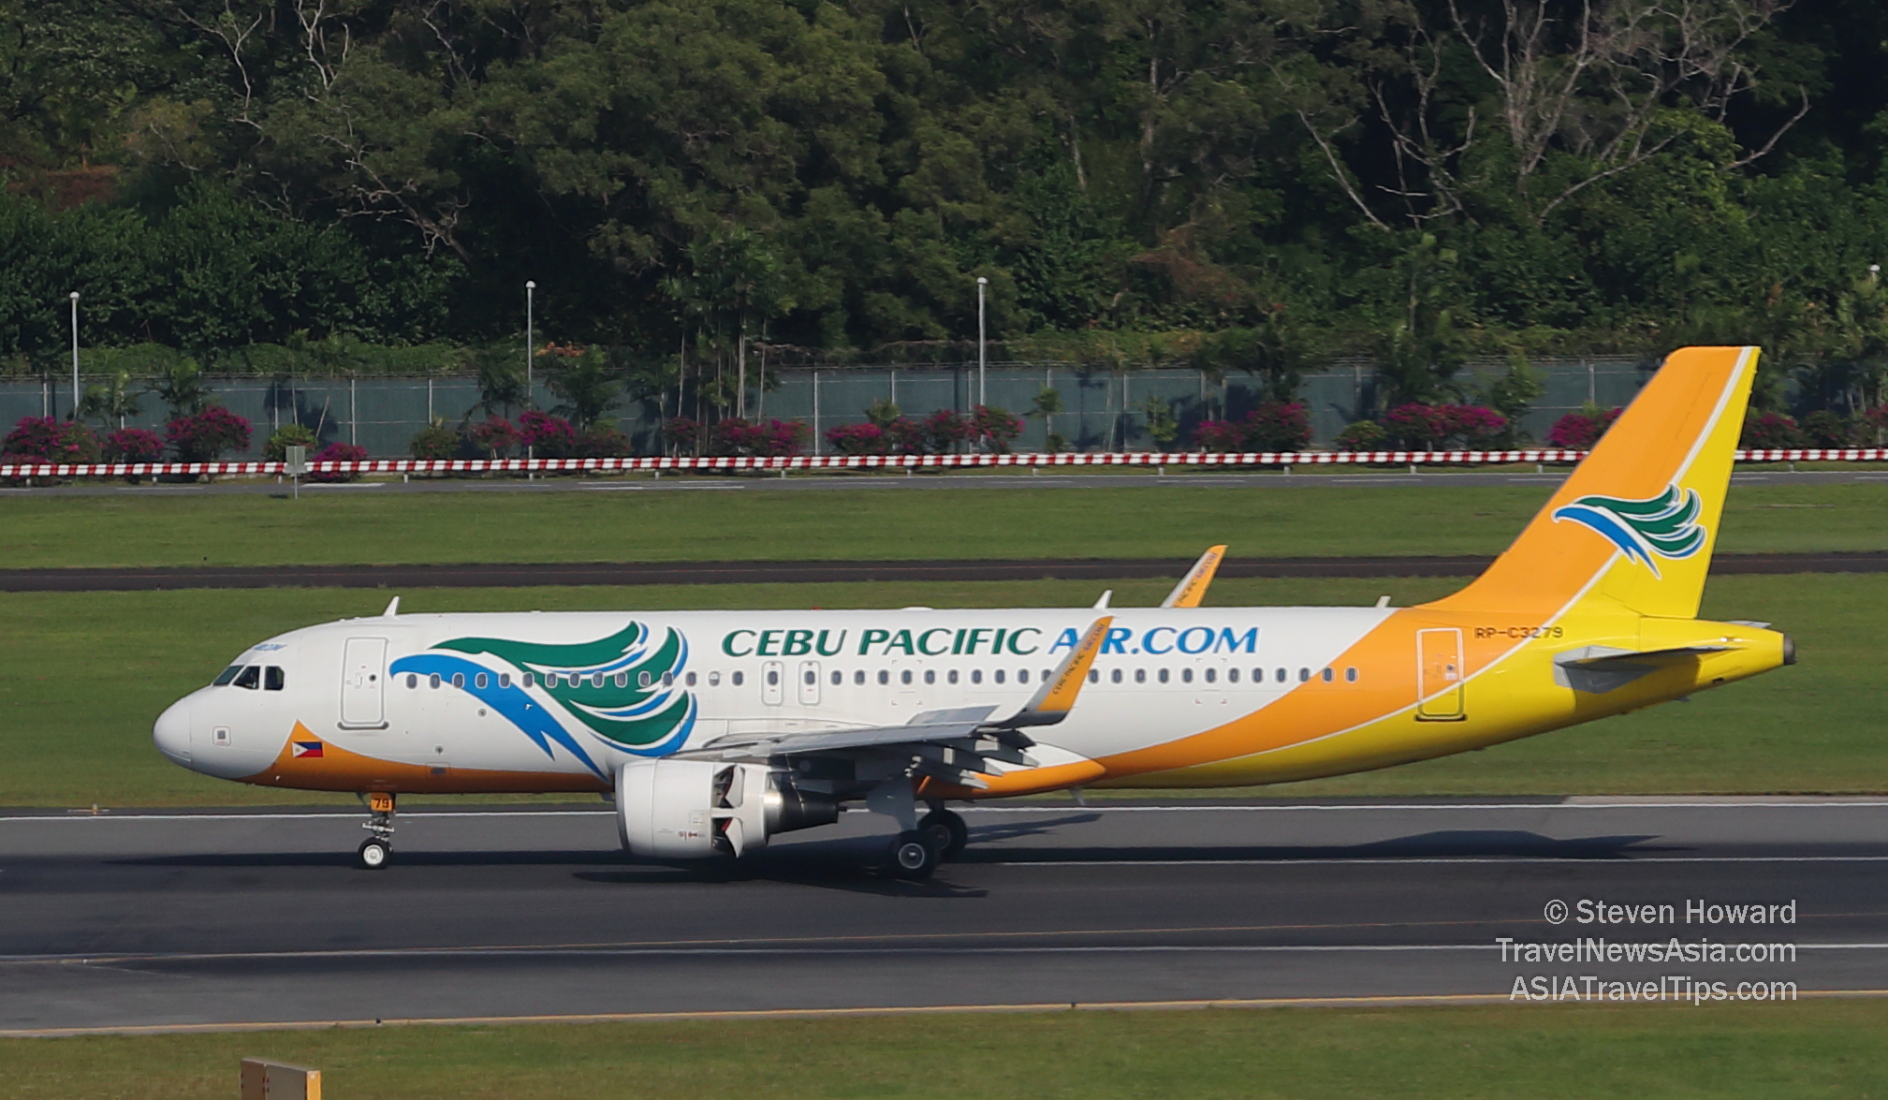 Cebu Pacific A320 reg: RP-3279. Picture by Steven Howard of TravelNewsAsia.com Click to enlarge.